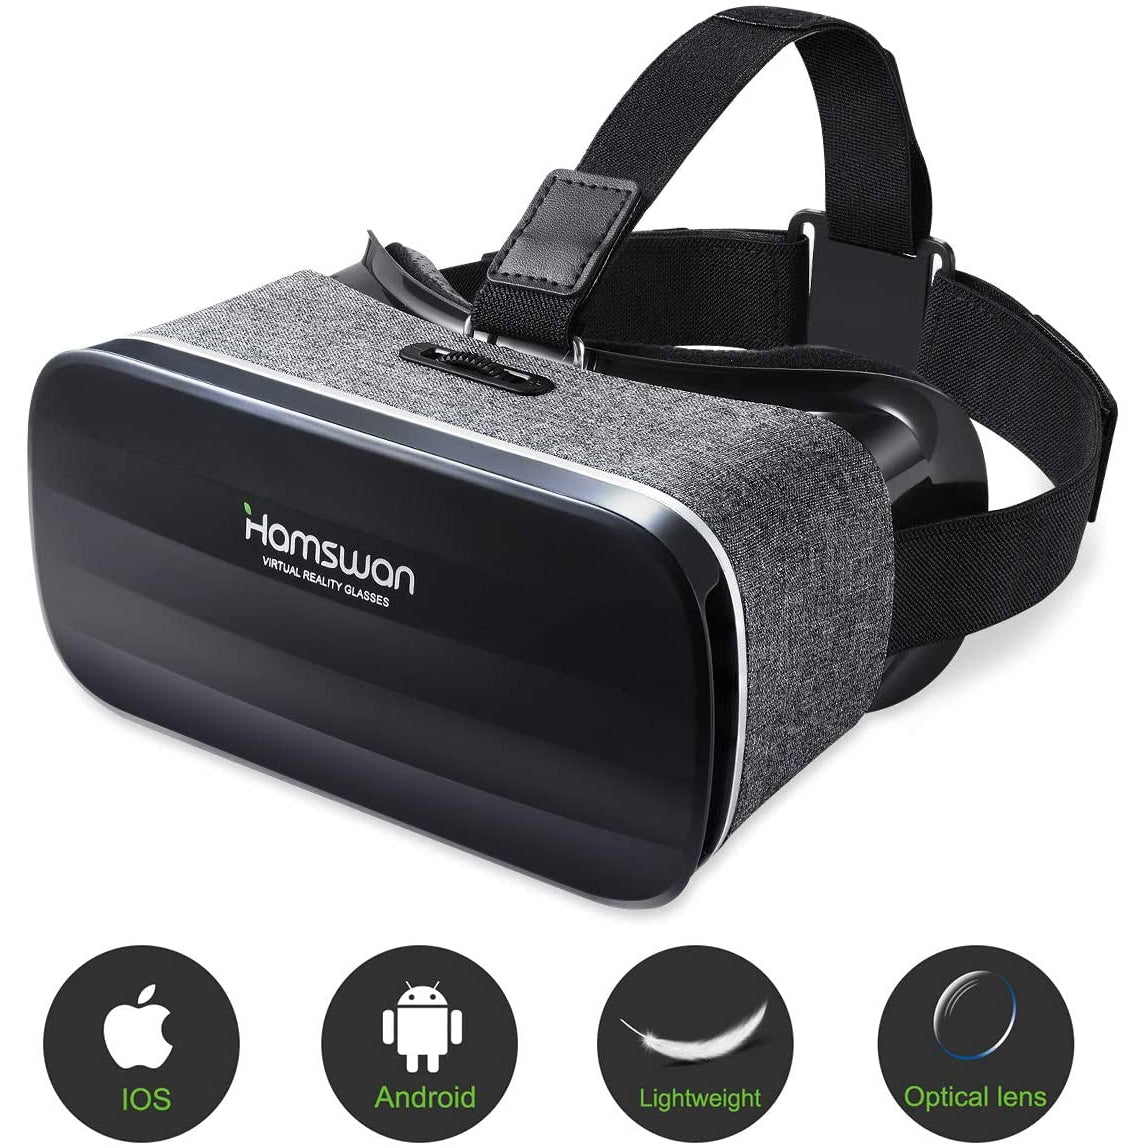 Hamswan Virtual Reality Headset, VR Goggles-for 3D VR Movies & Video Games with 100 Degree FOV